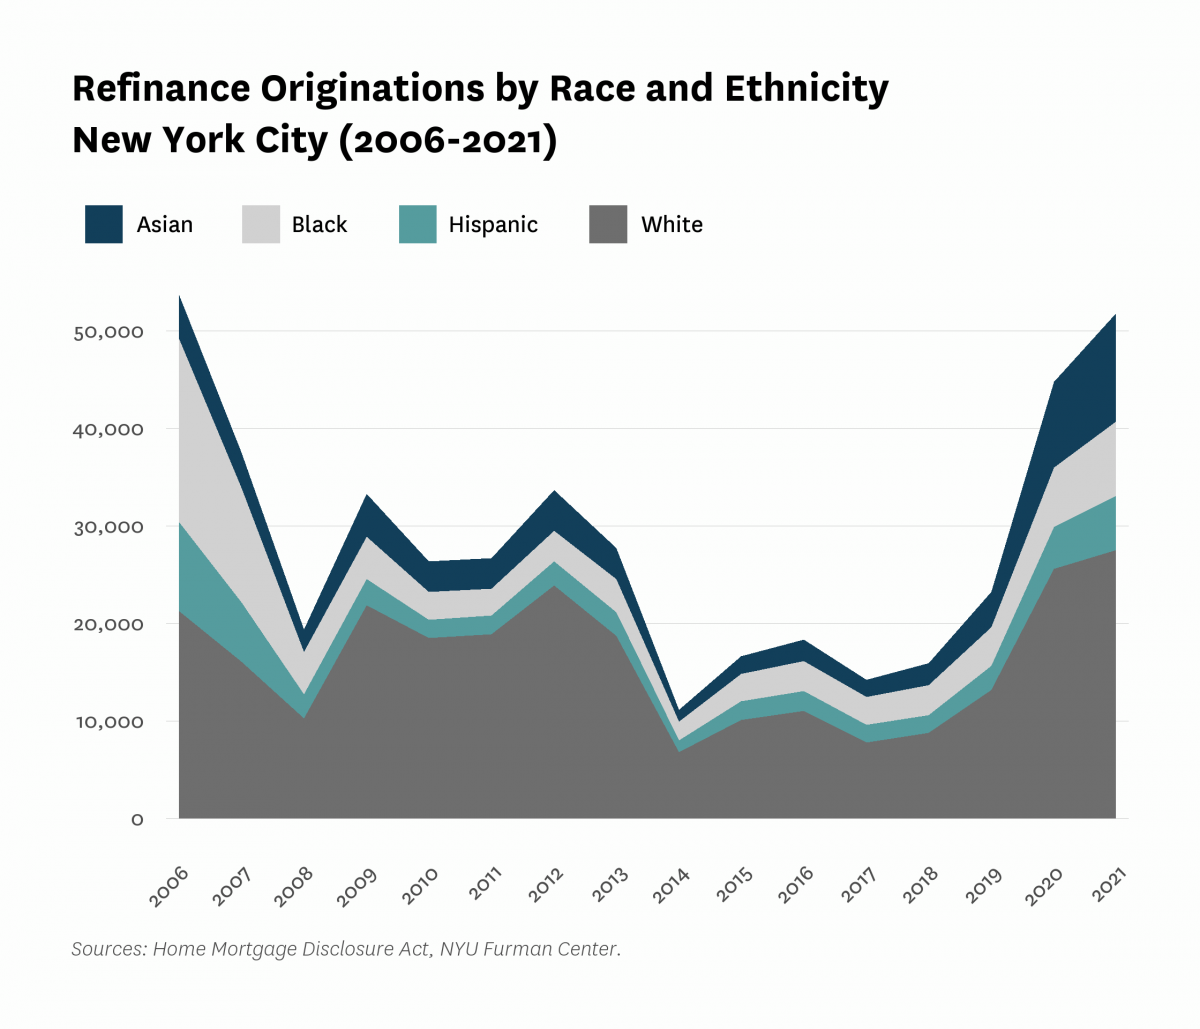 Area chart showing refinance originations by race and ethnicity in New York City from 2006 to 2021.